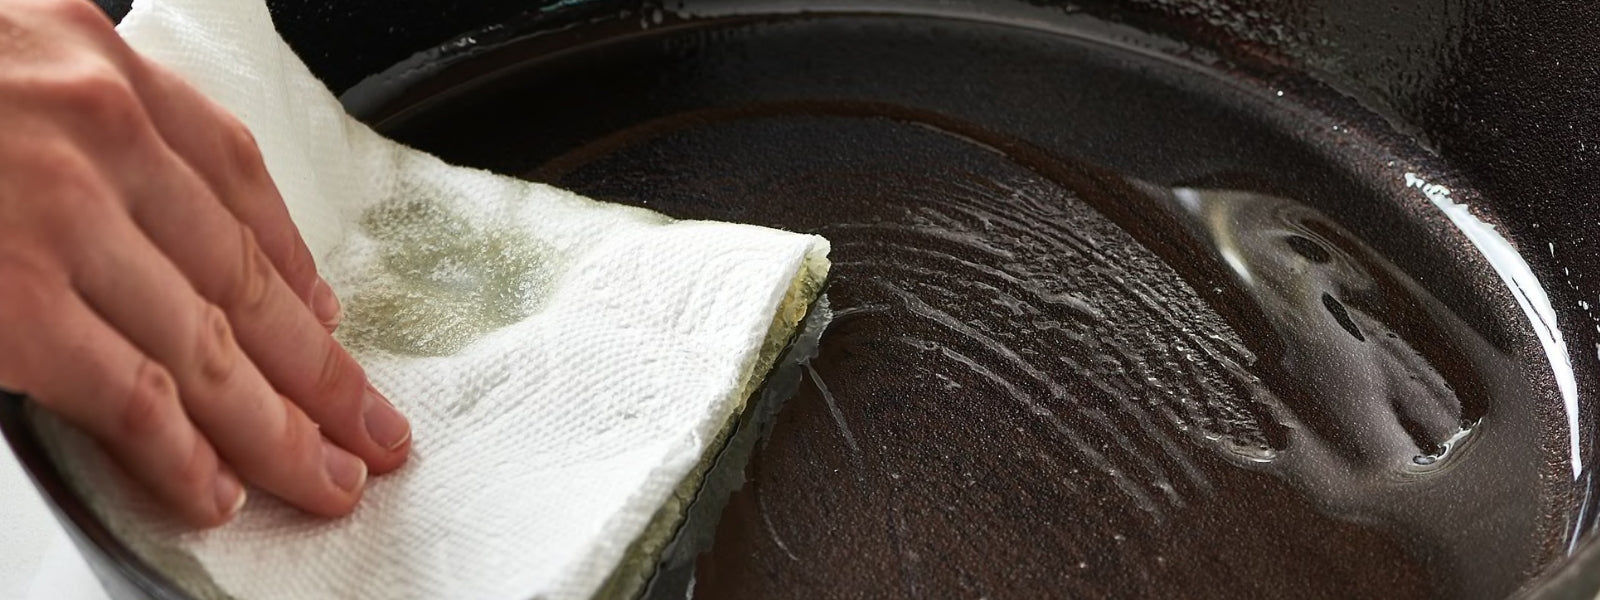 How To Clean Iron Tawa Using Baking Soda, Hot Water, Vinegar And Other  Simple Ingredients